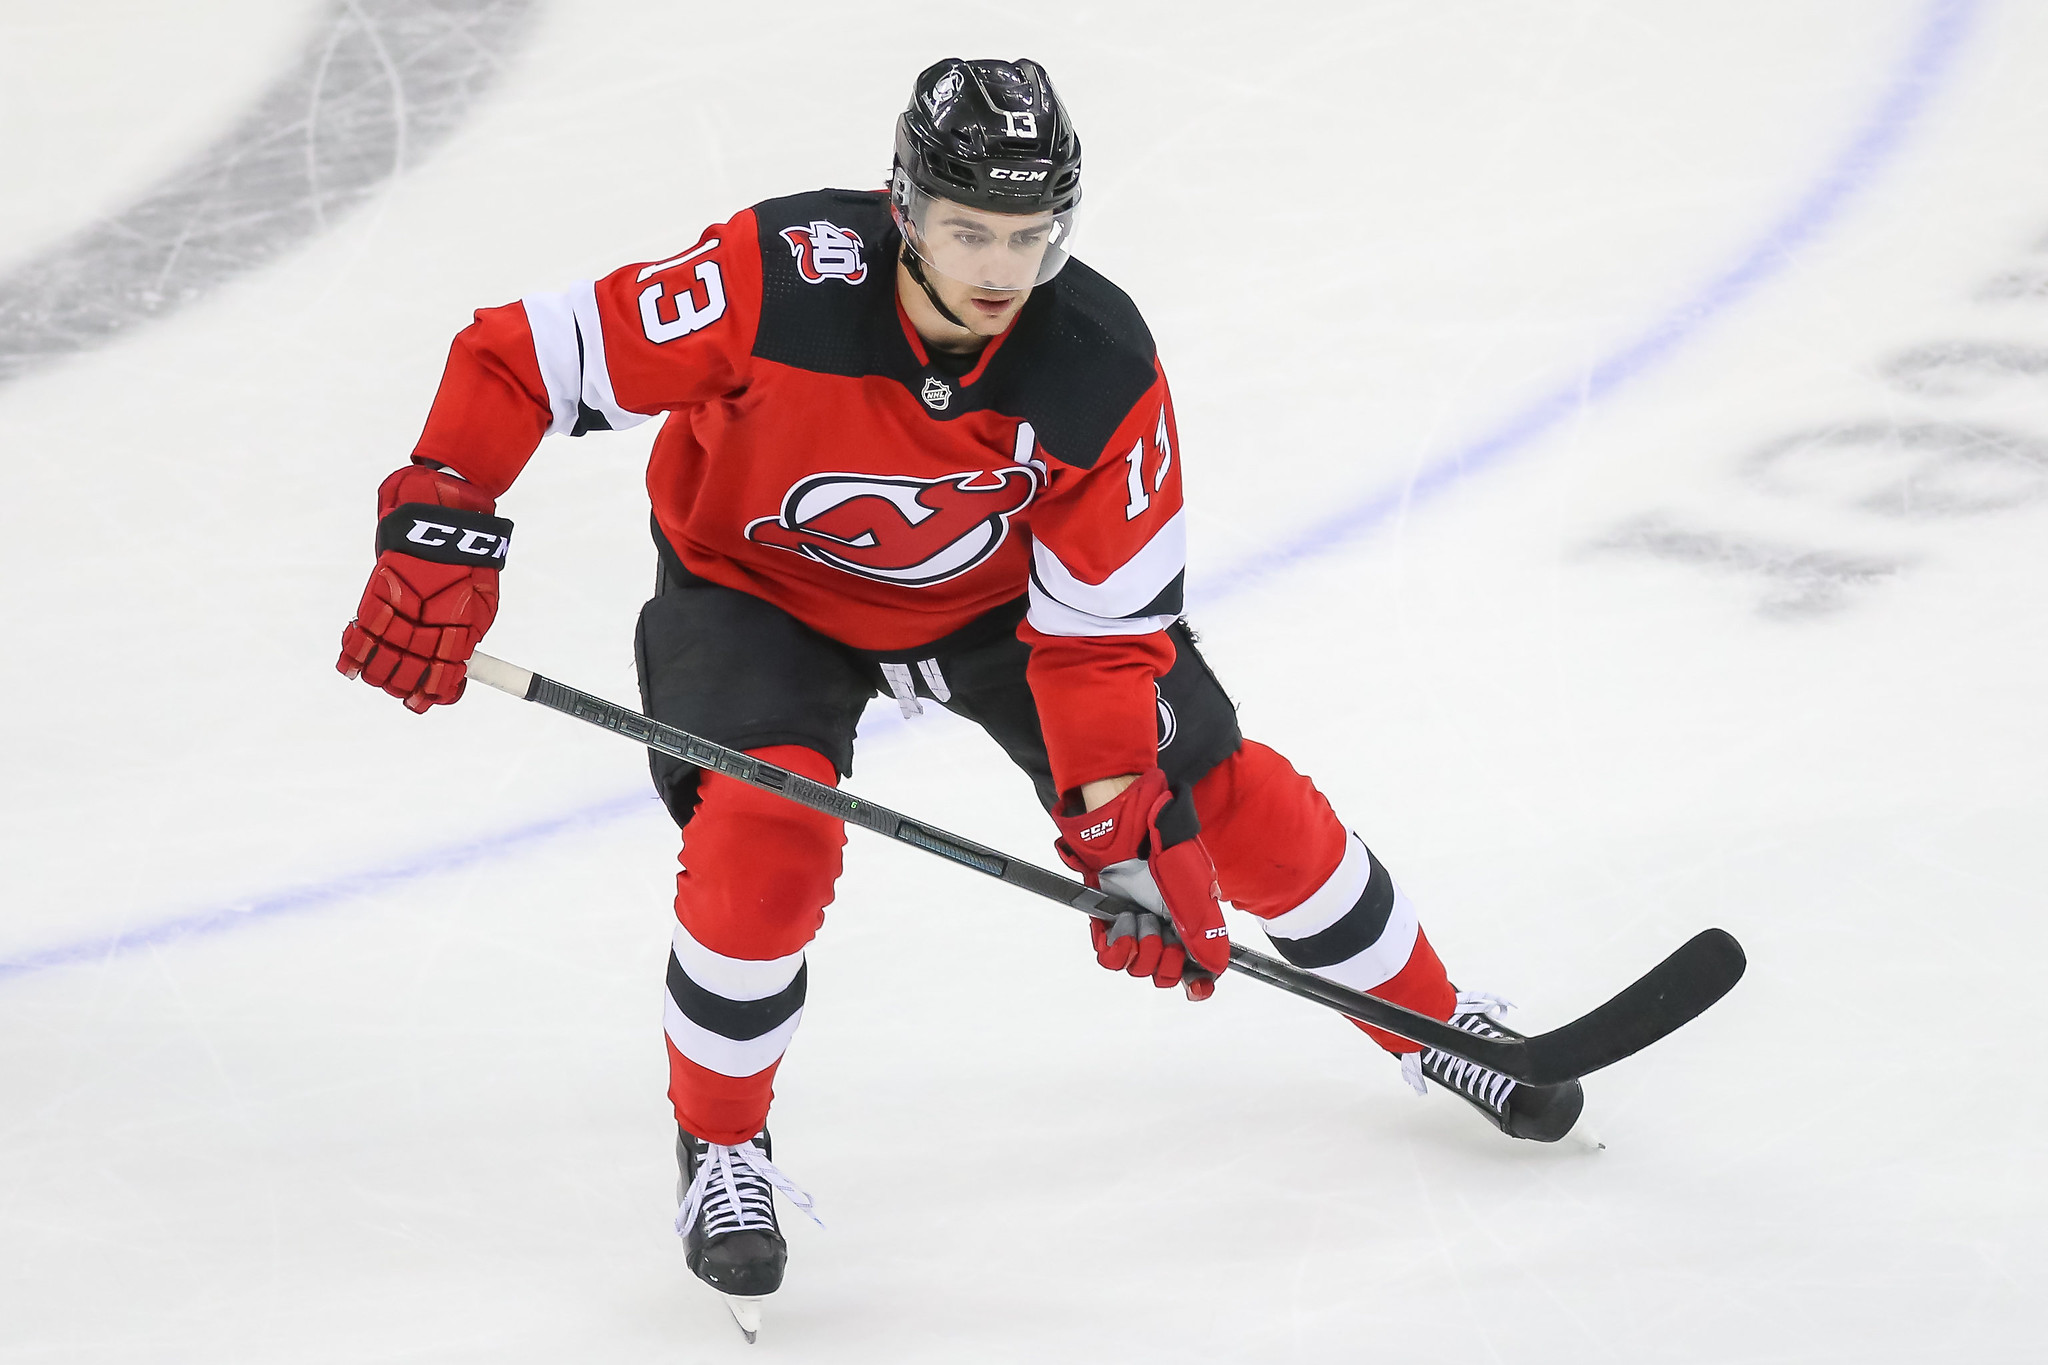 Two Devils Finalists for 2022-23 NHL Awards: Nico Hischier for the Selke;  Jack Hughes for the Lady Byng - All About The Jersey